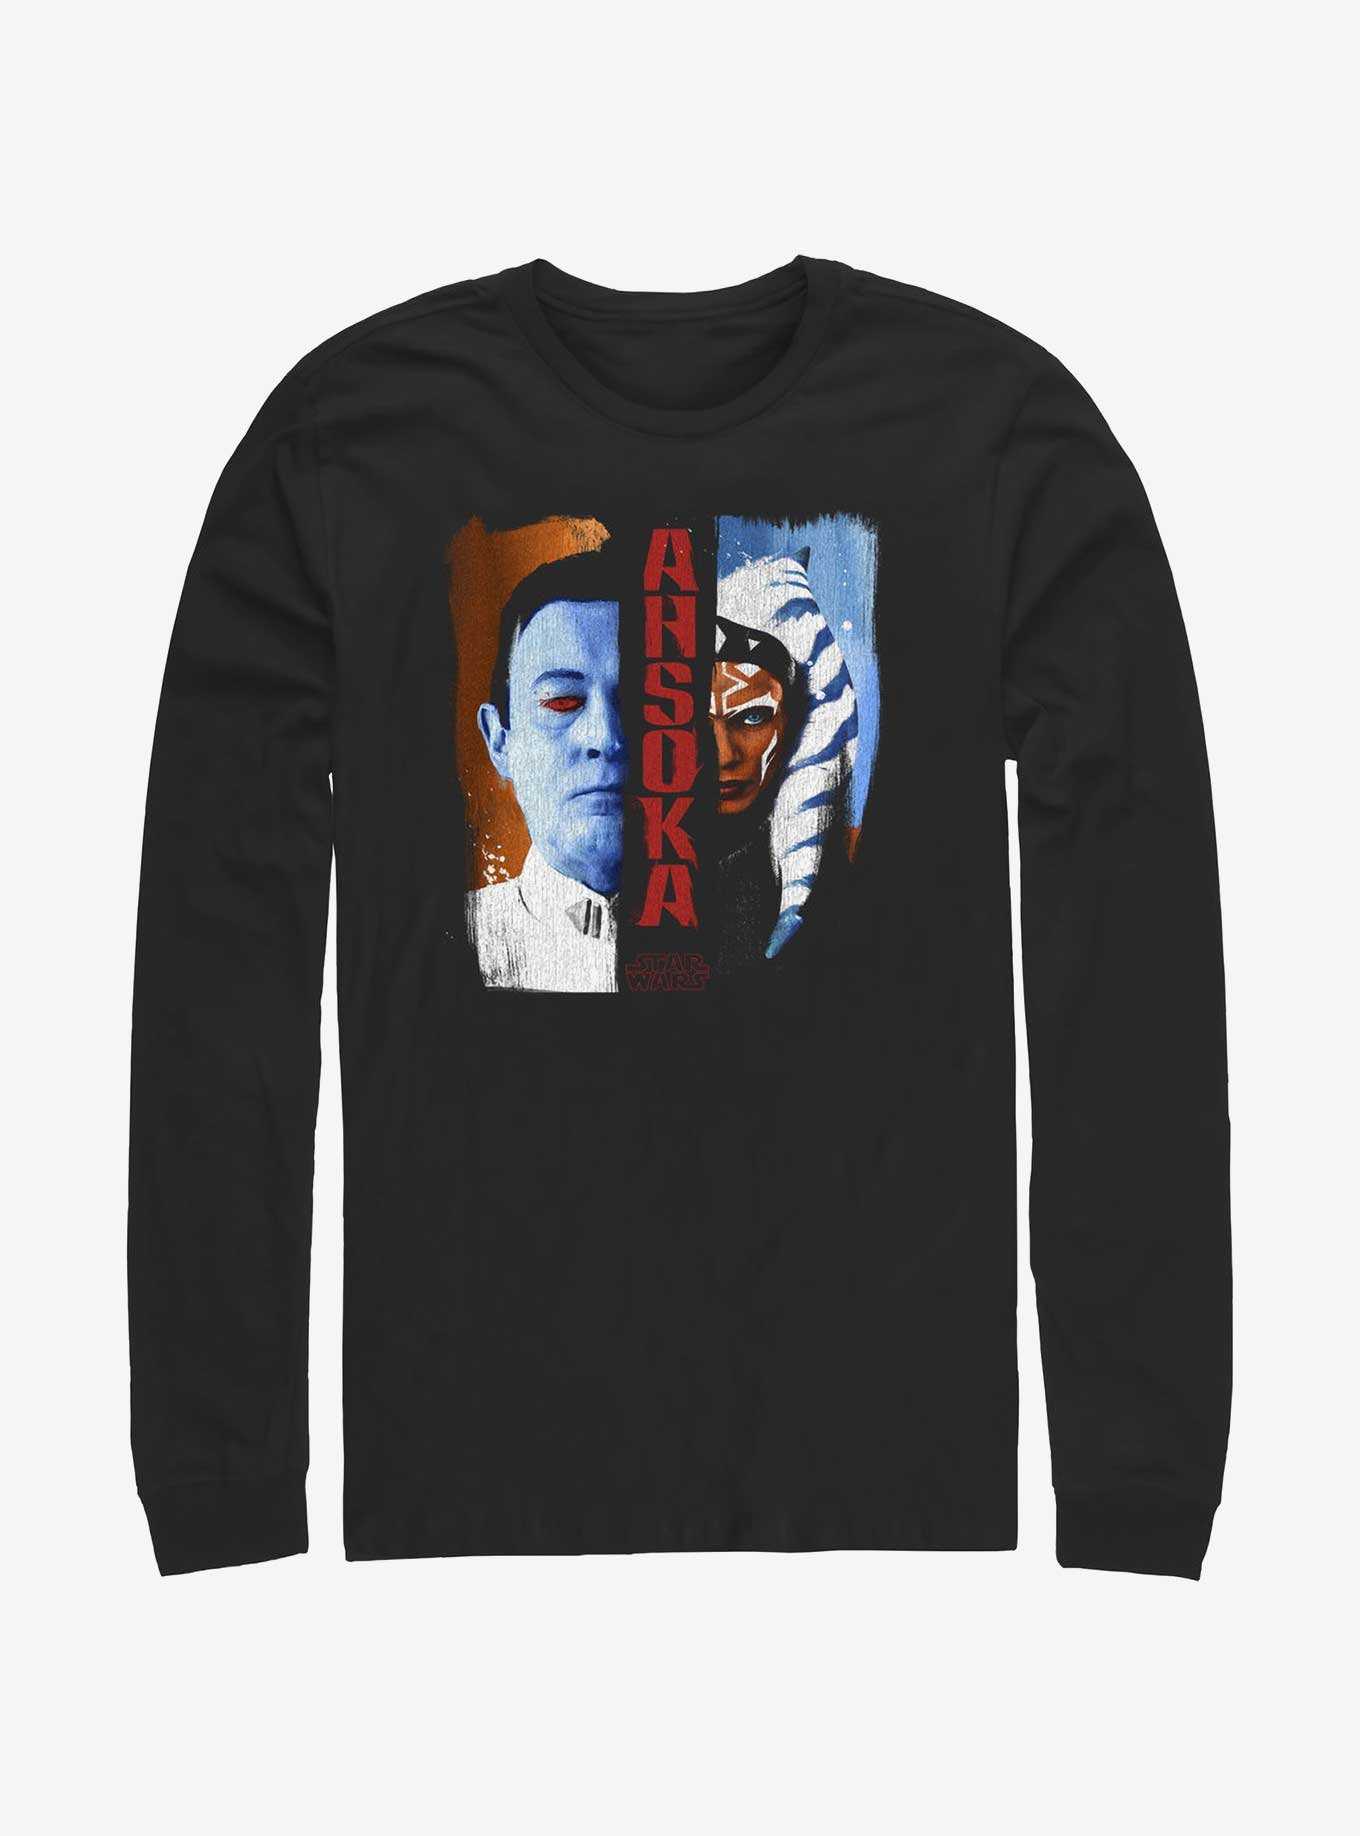 Star Wars Complimentary Conflict Thrawn and Ahsoka Long-Sleeve T-Shirt, , hi-res